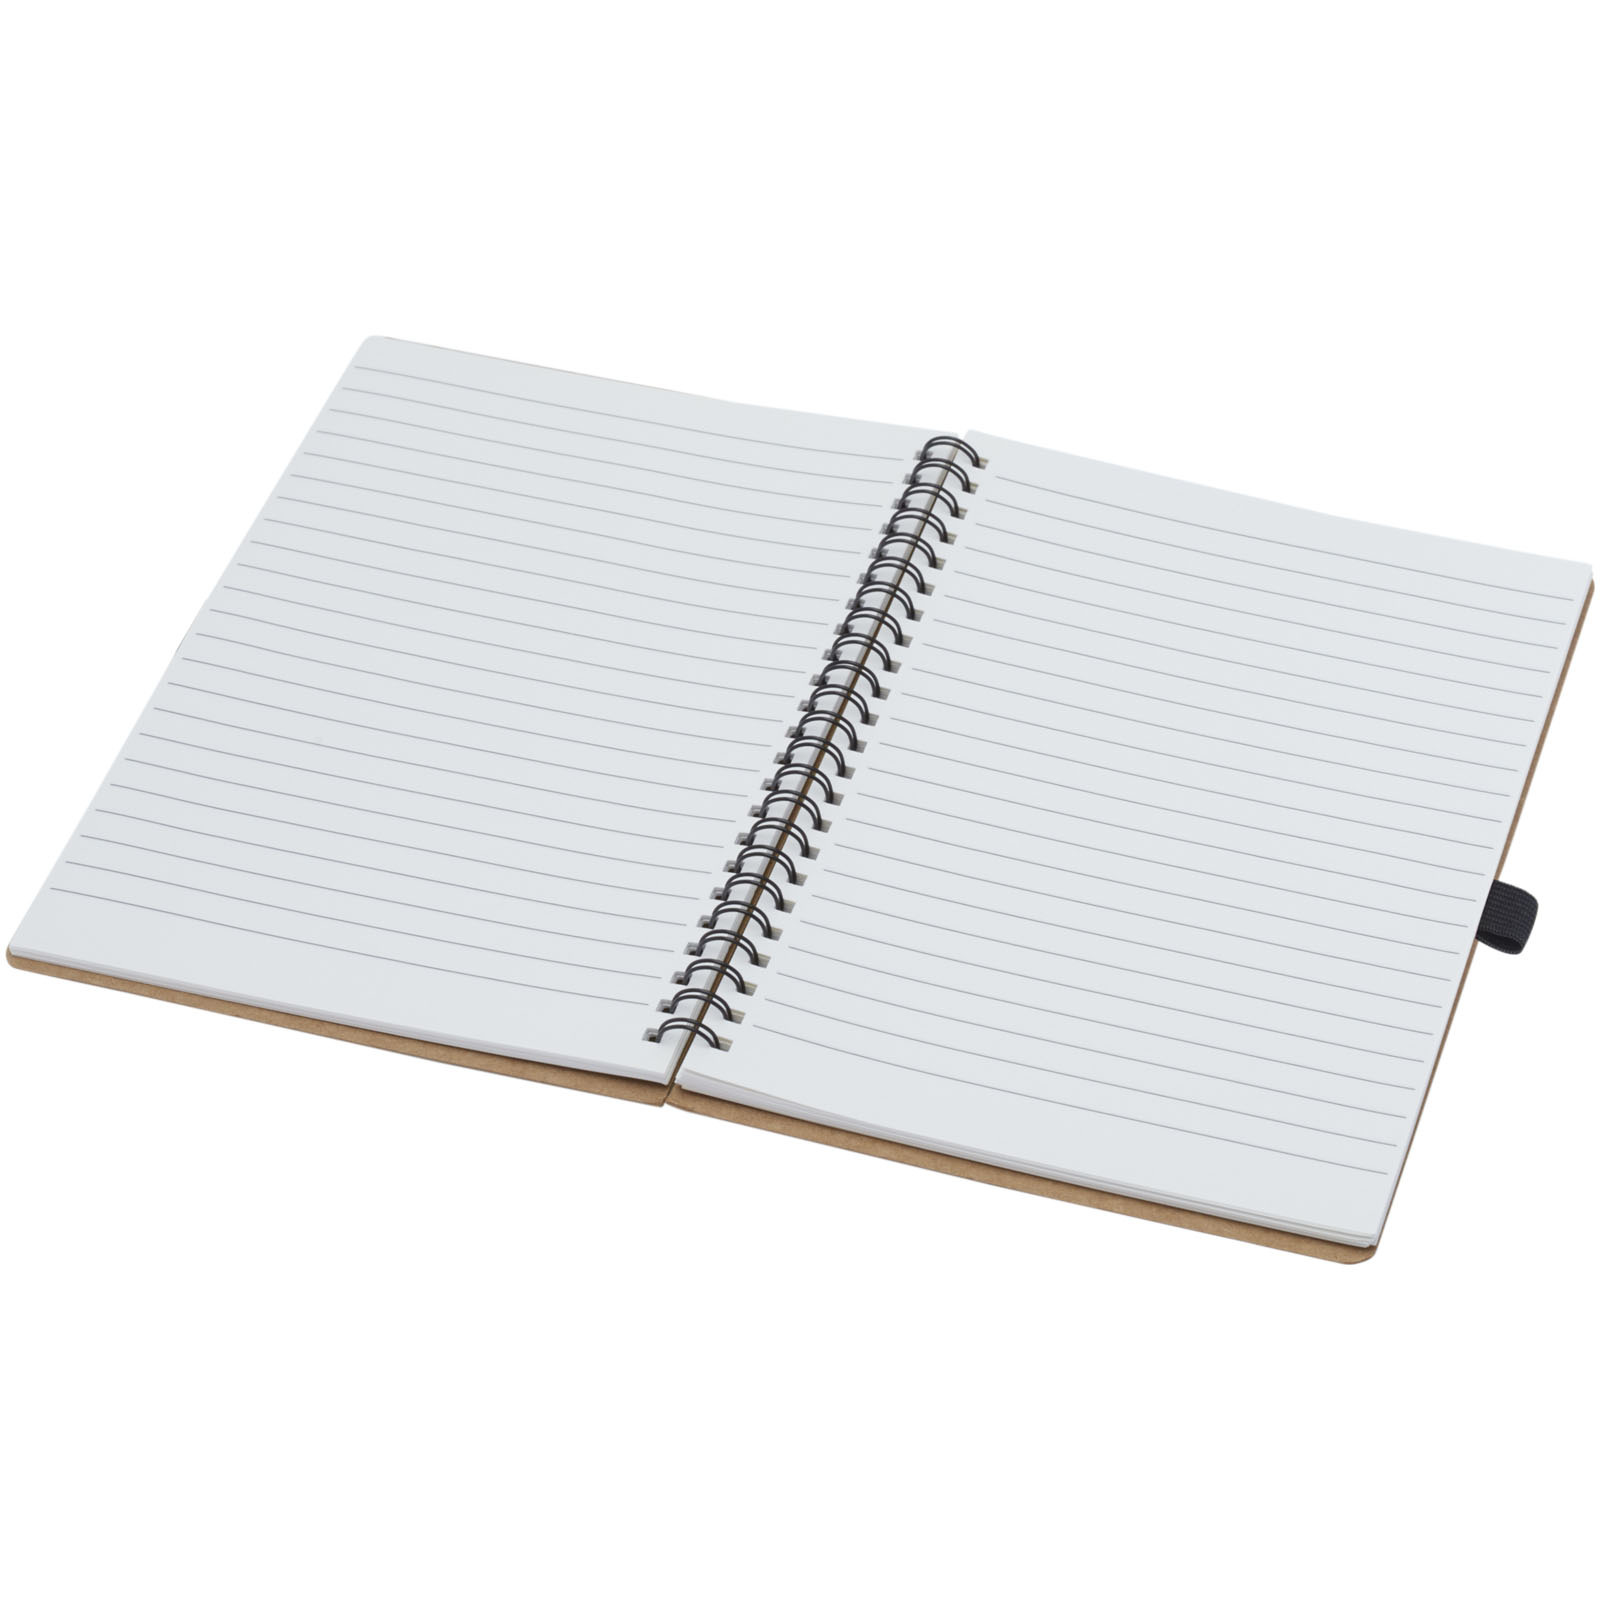 Advertising Notebooks - Cobble A5 wire-o recycled cardboard notebook with stone paper - 3